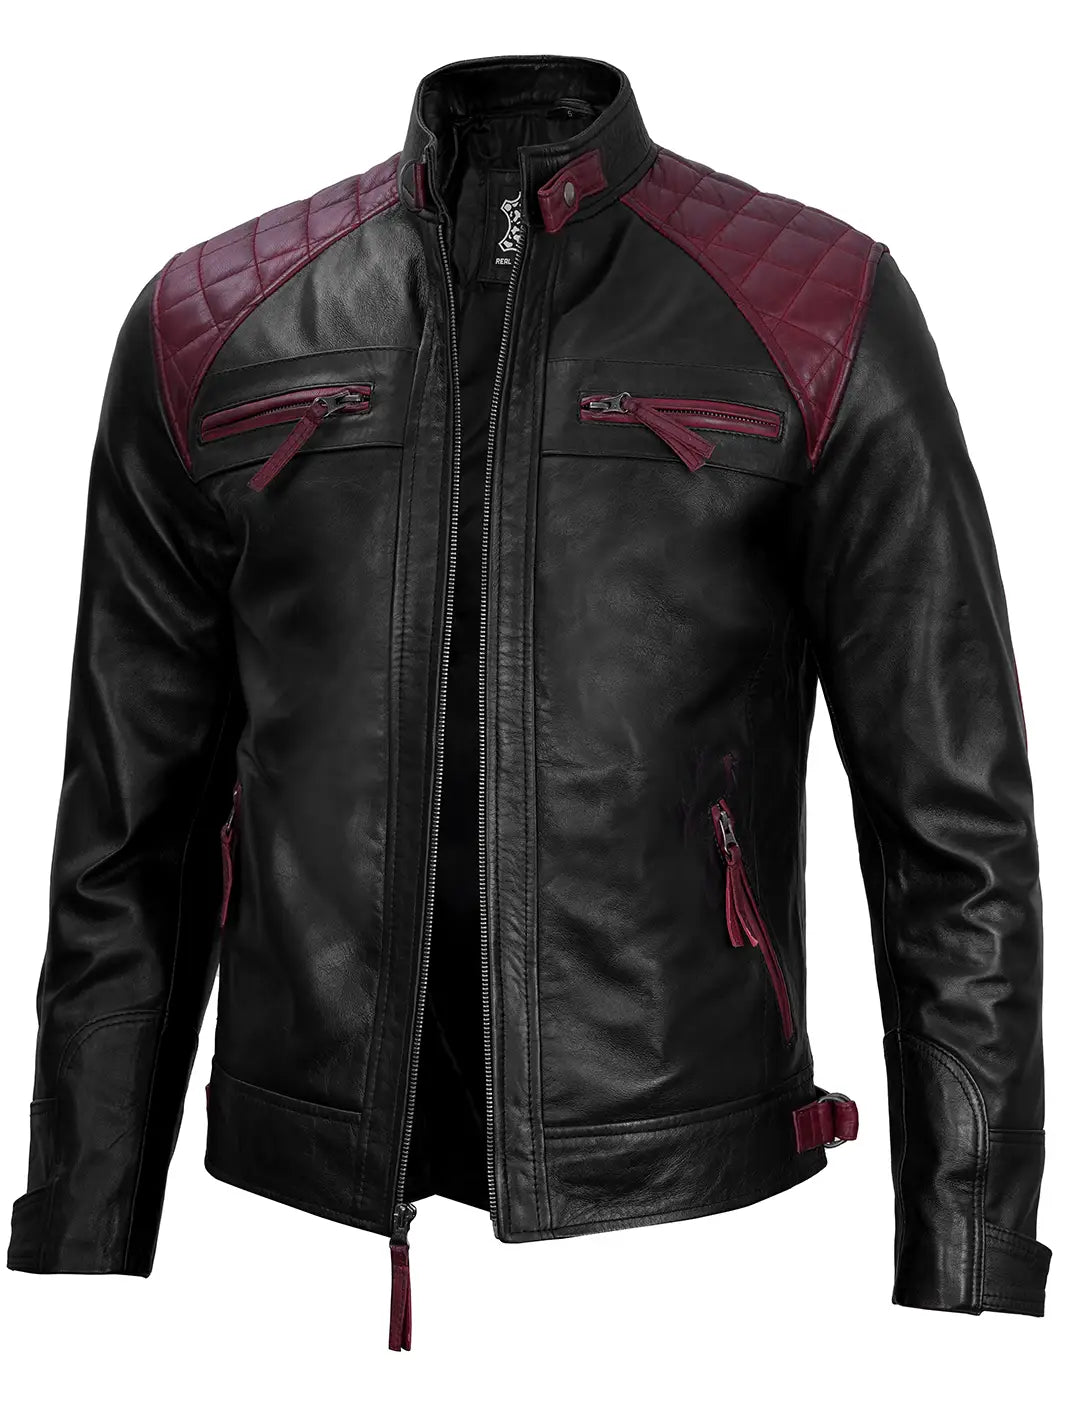 Mens black and maroon leather jacket